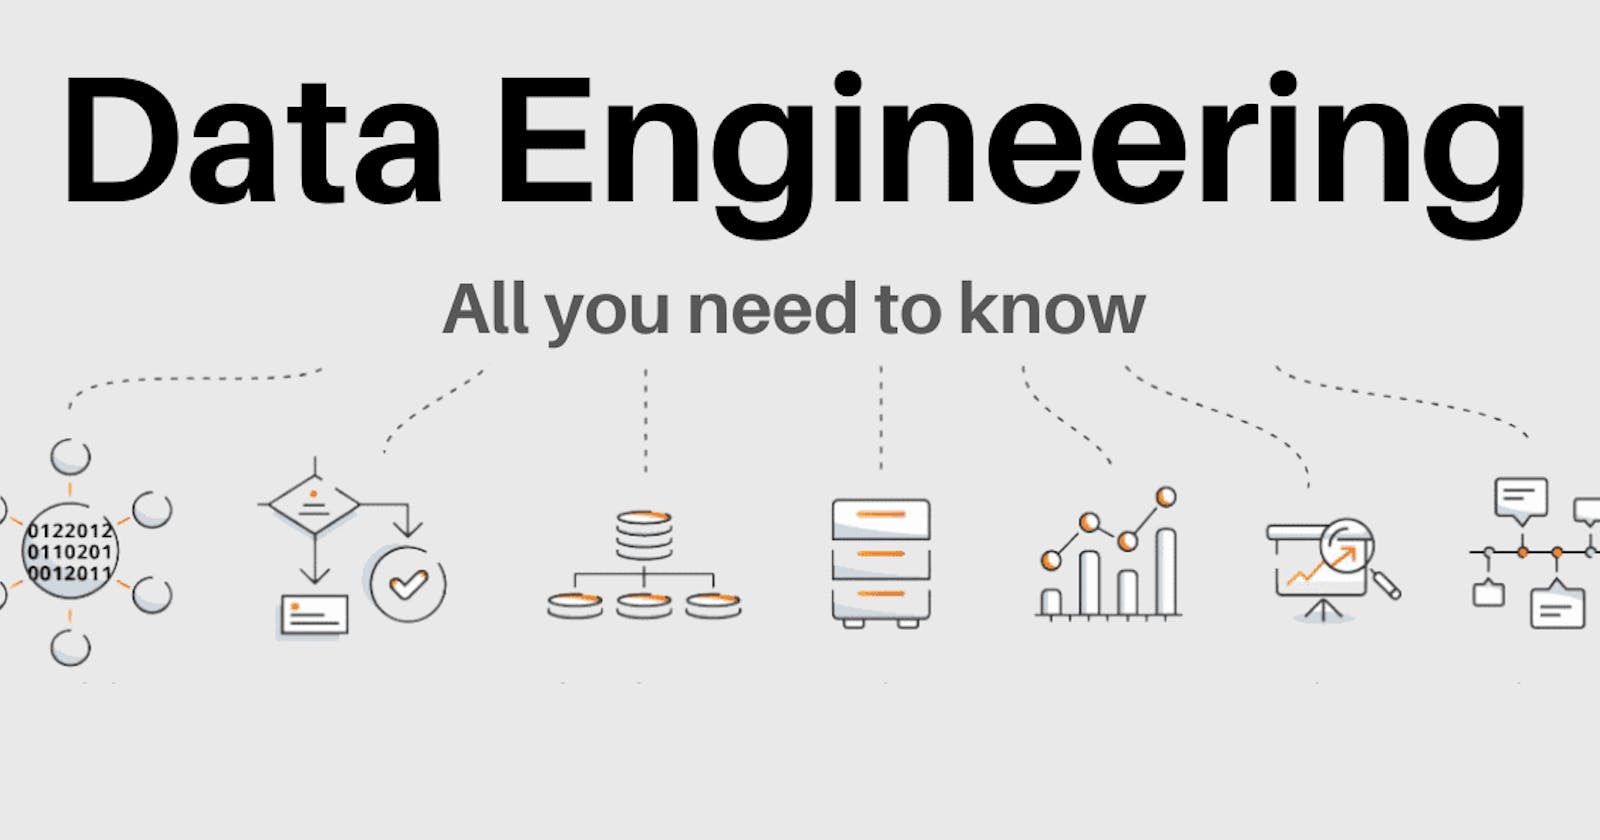 Mastering the basics: An introduction to DATA ENGINEERING